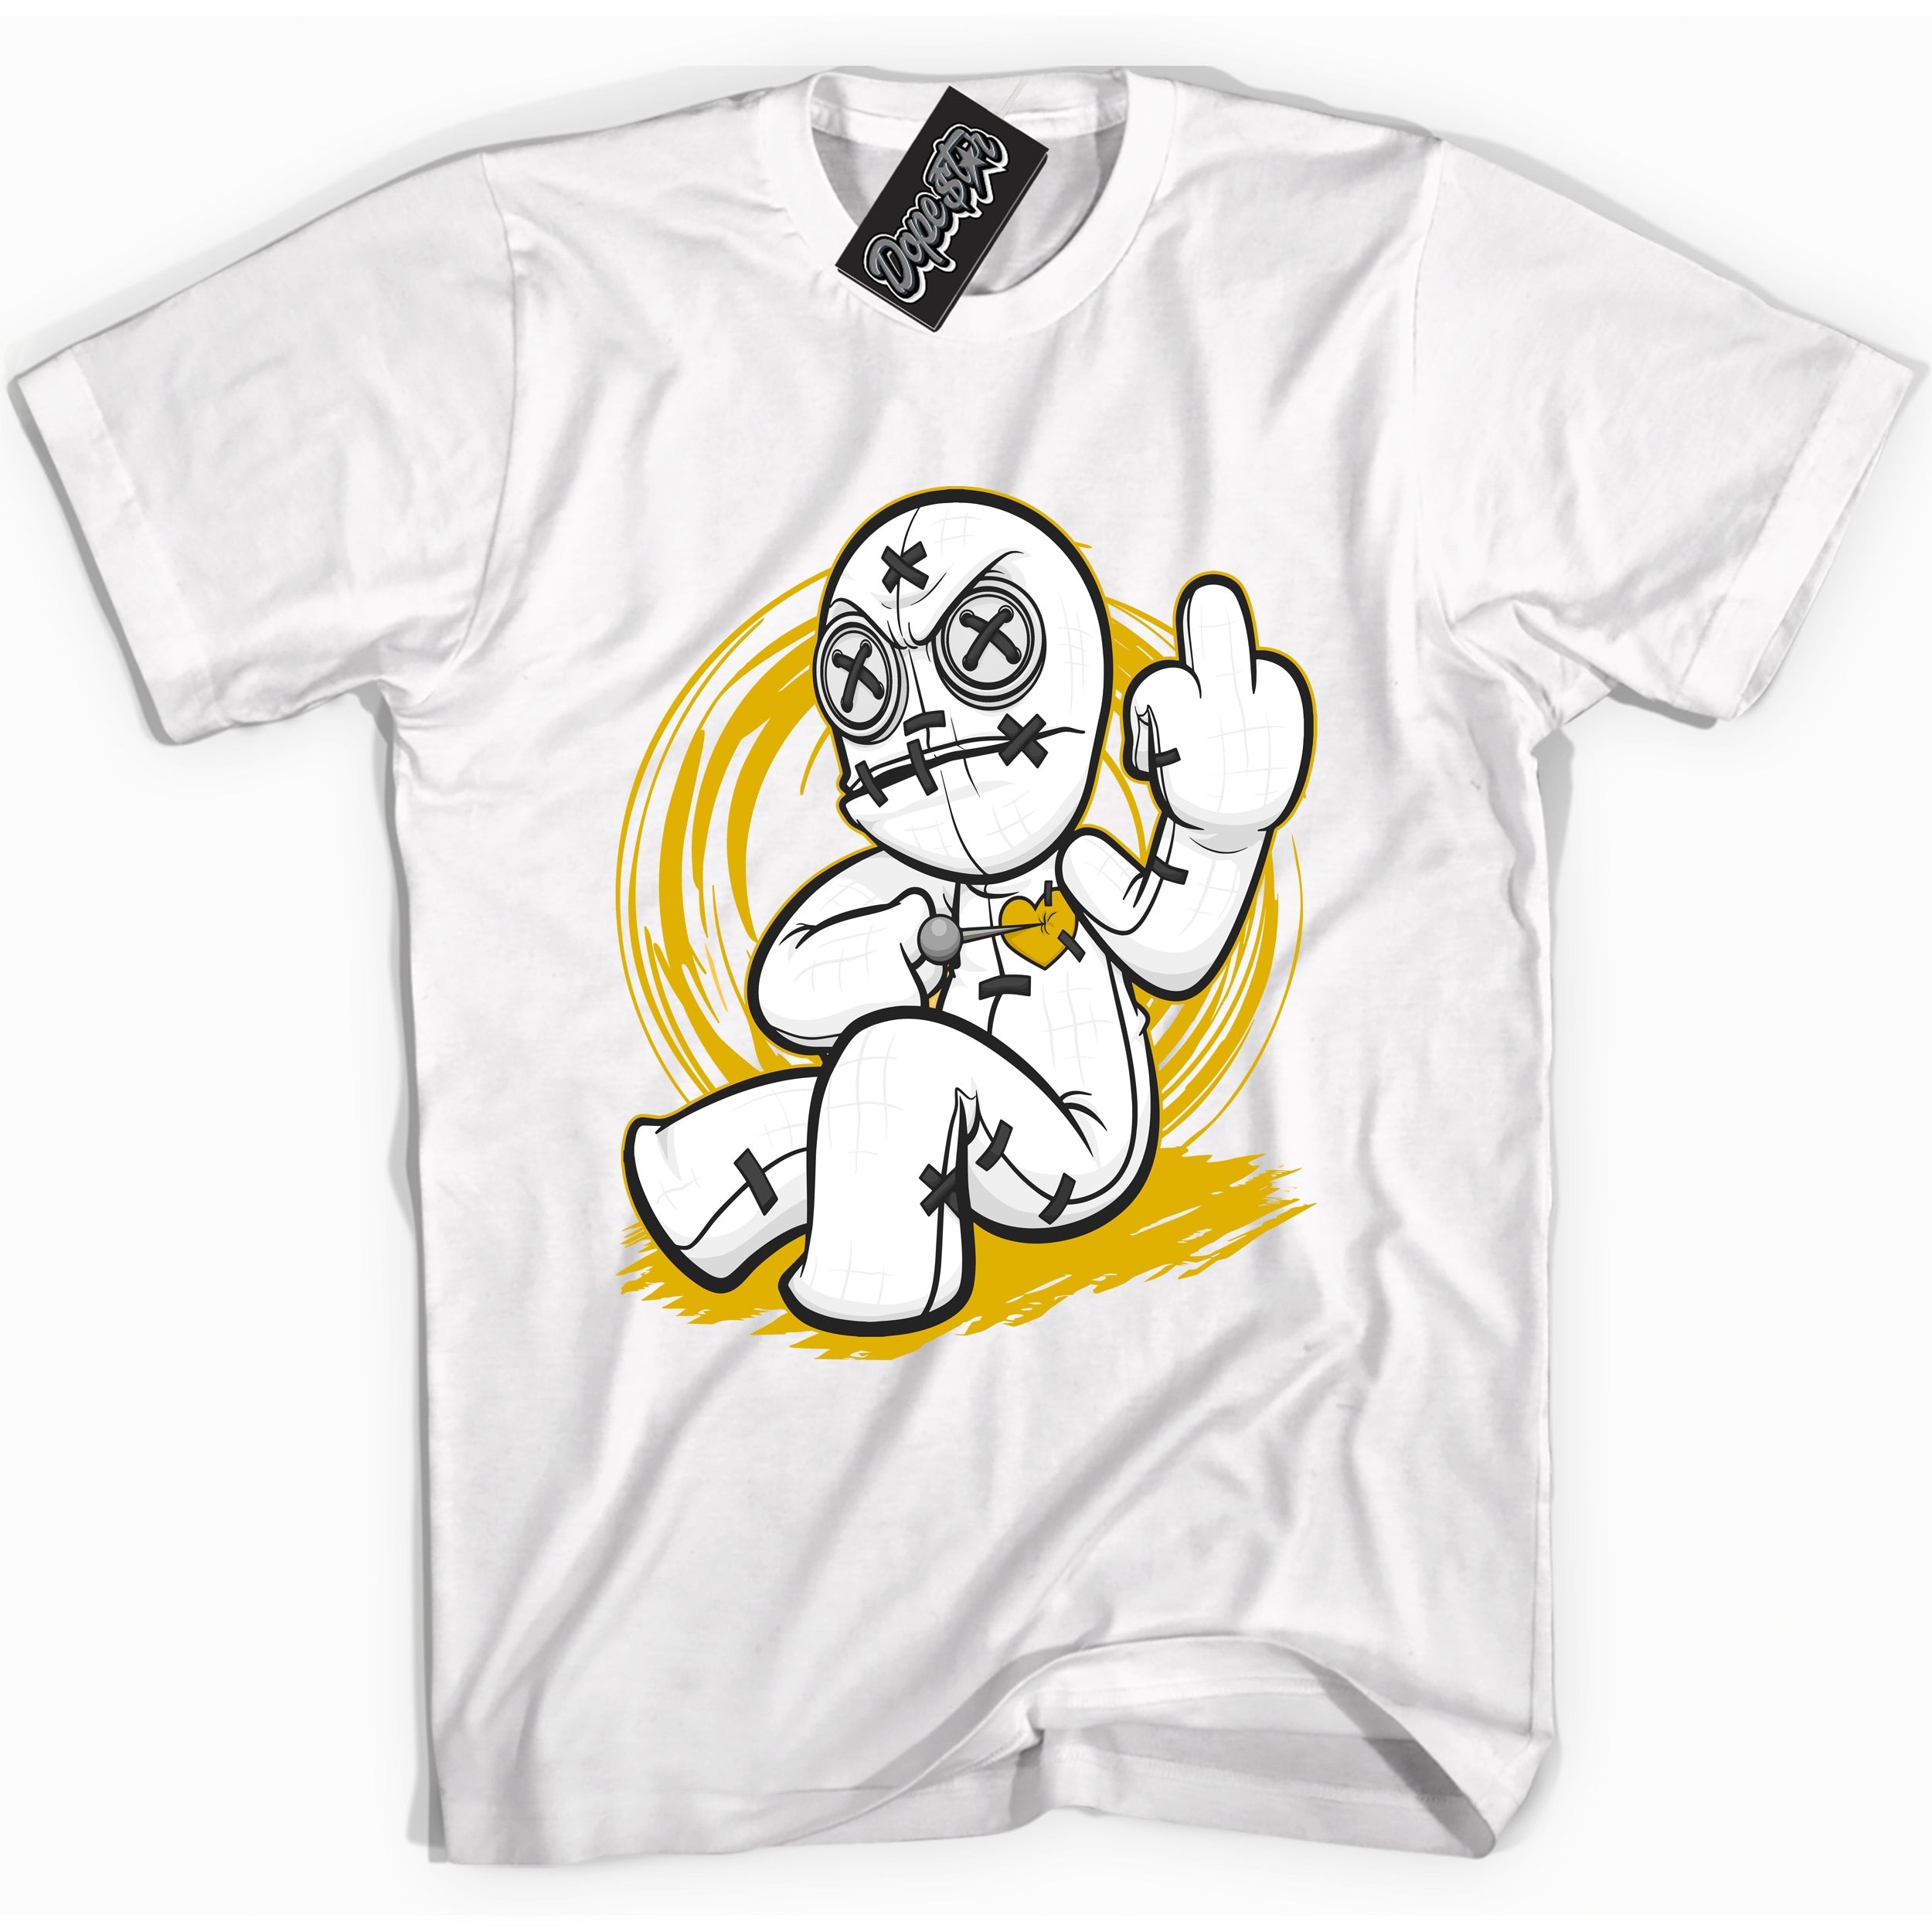 Cool White Shirt with “ VooDoo Doll” design that perfectly matches Yellow Ochre 6s Sneakers.